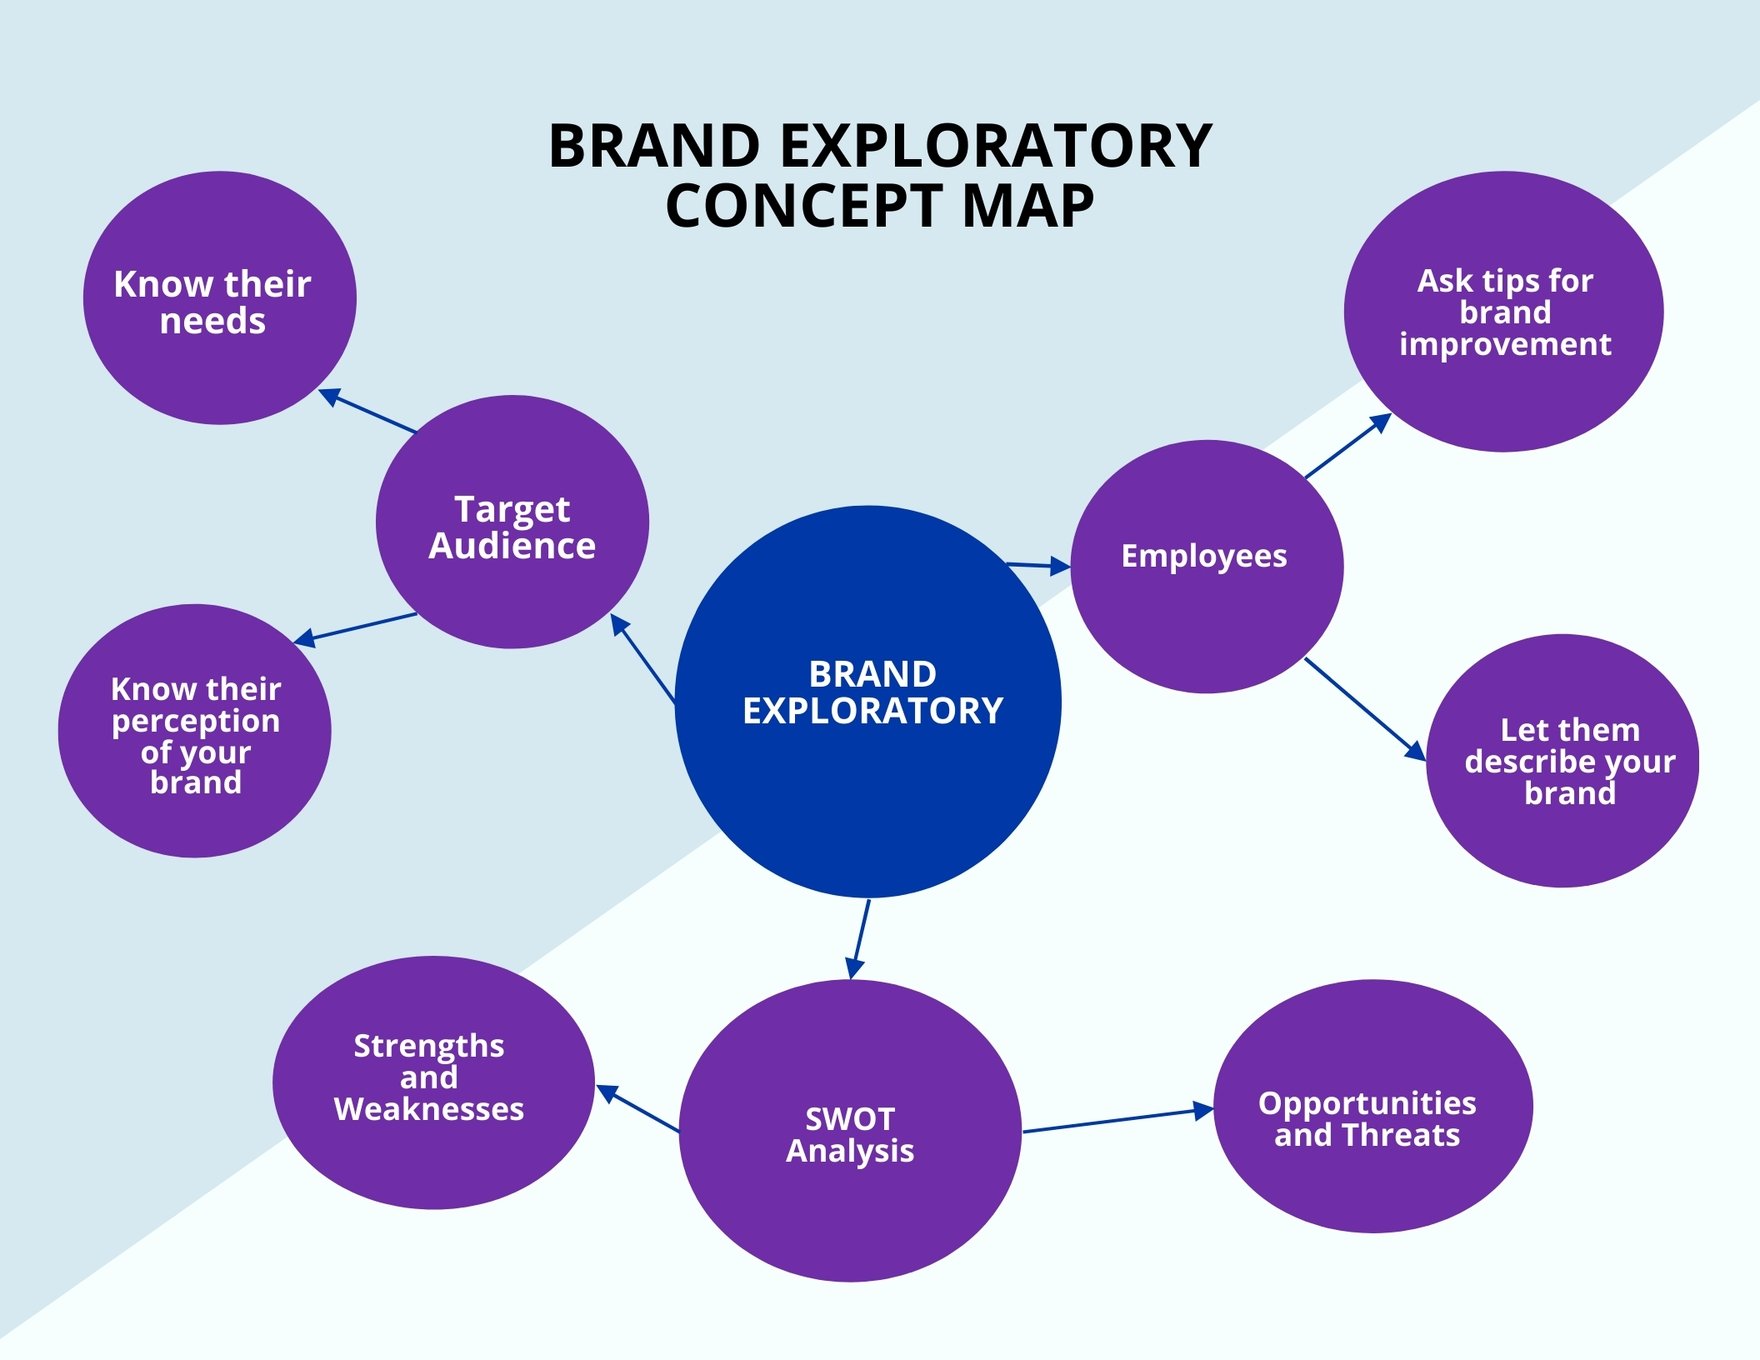 Brand Exploratory Concept Map Template in Word, Google Docs